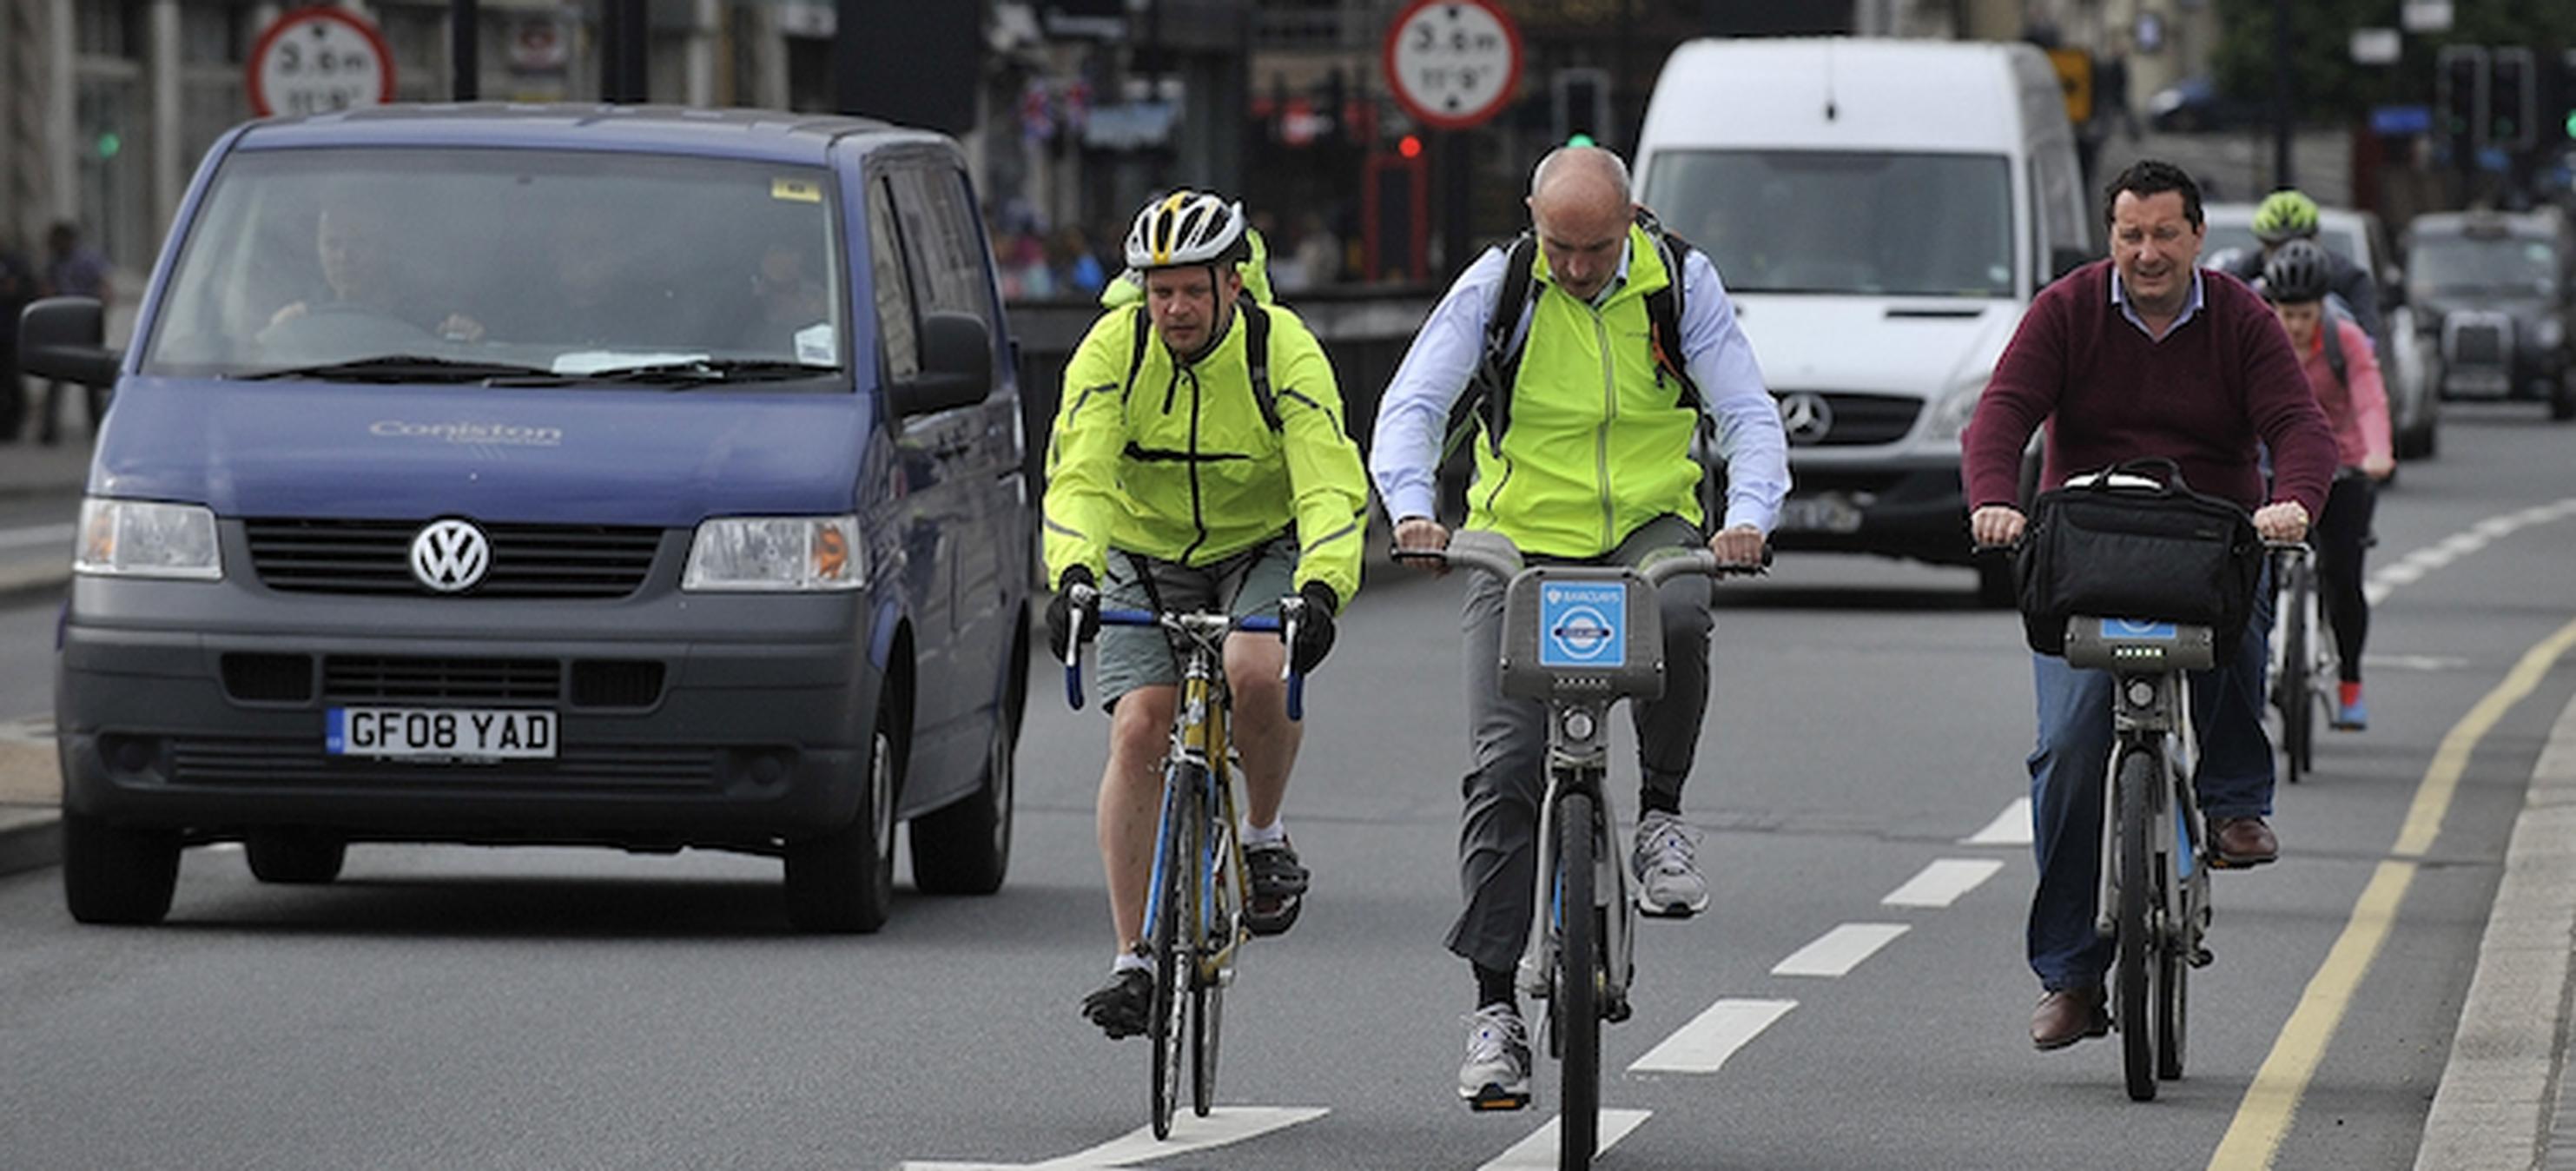 53% of people want more designated cycle lanes on roads, says Cycling UK